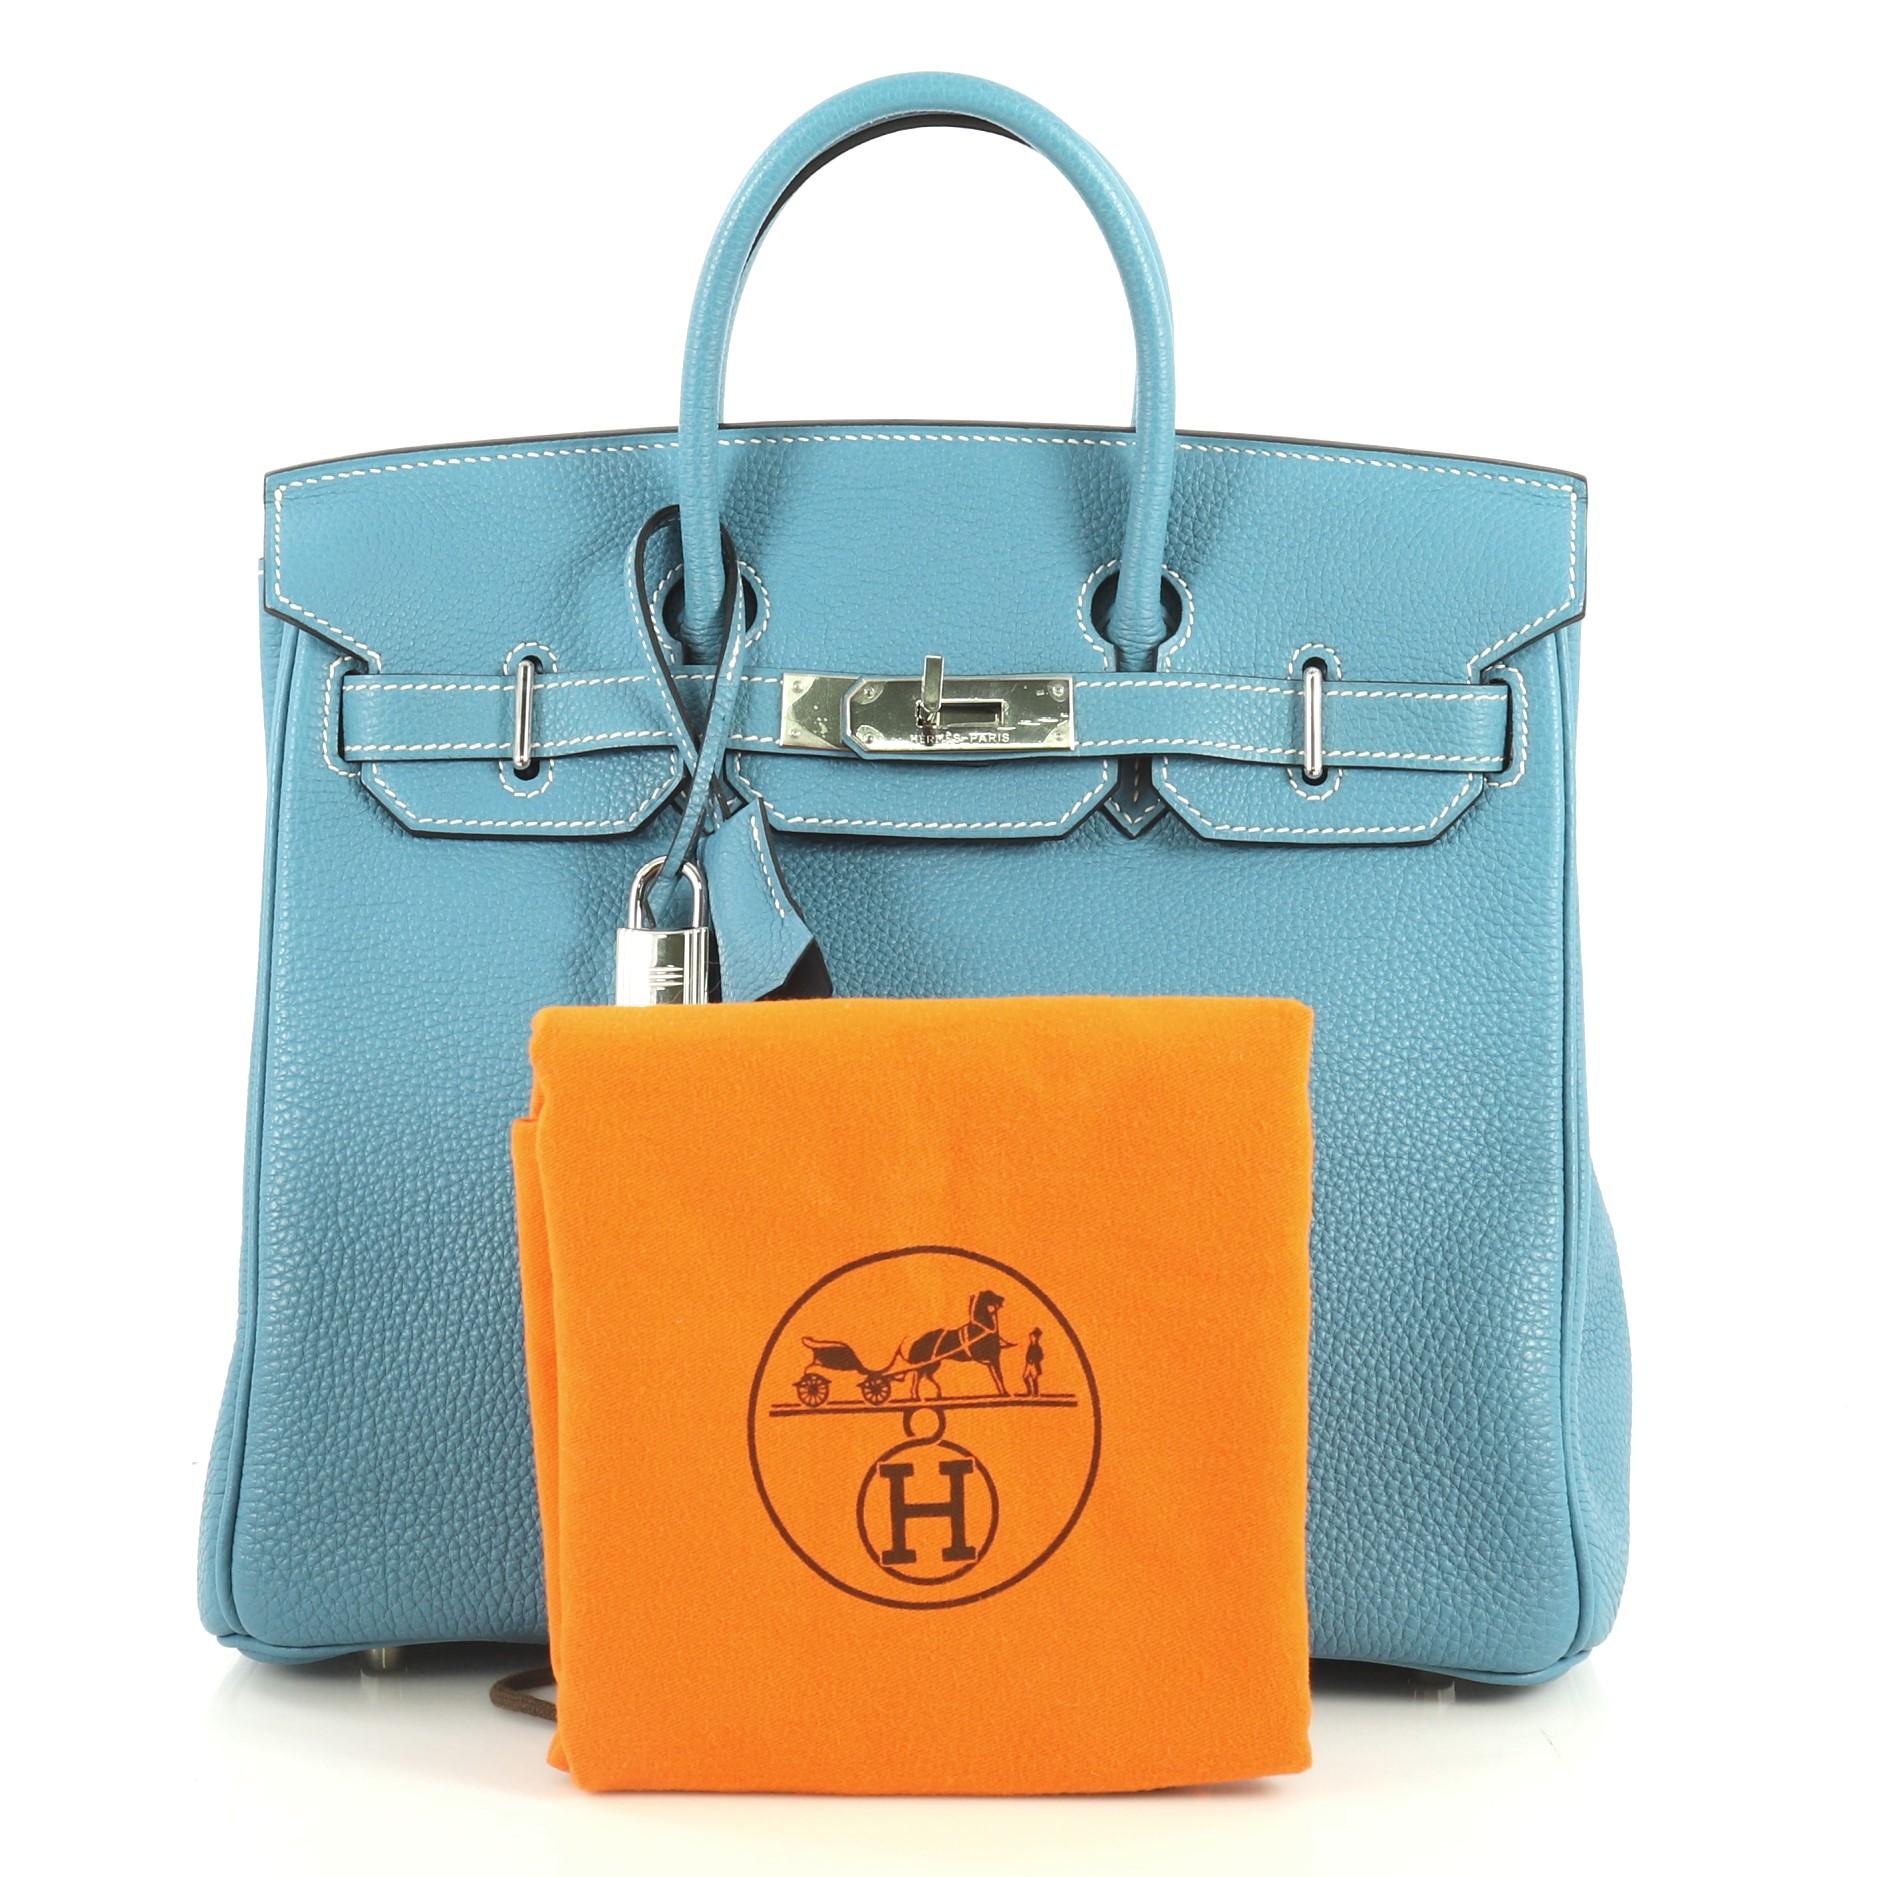 This Hermes HAC Birkin Bag Bleu Jean Togo with Palladium Hardware 28, crafted in Bleu Jean blue Togo leather, features dual rolled handles, front flap, and palladium hardware. Its turn-lock closure opens to a Bleu Jean blue Chevre leather interior